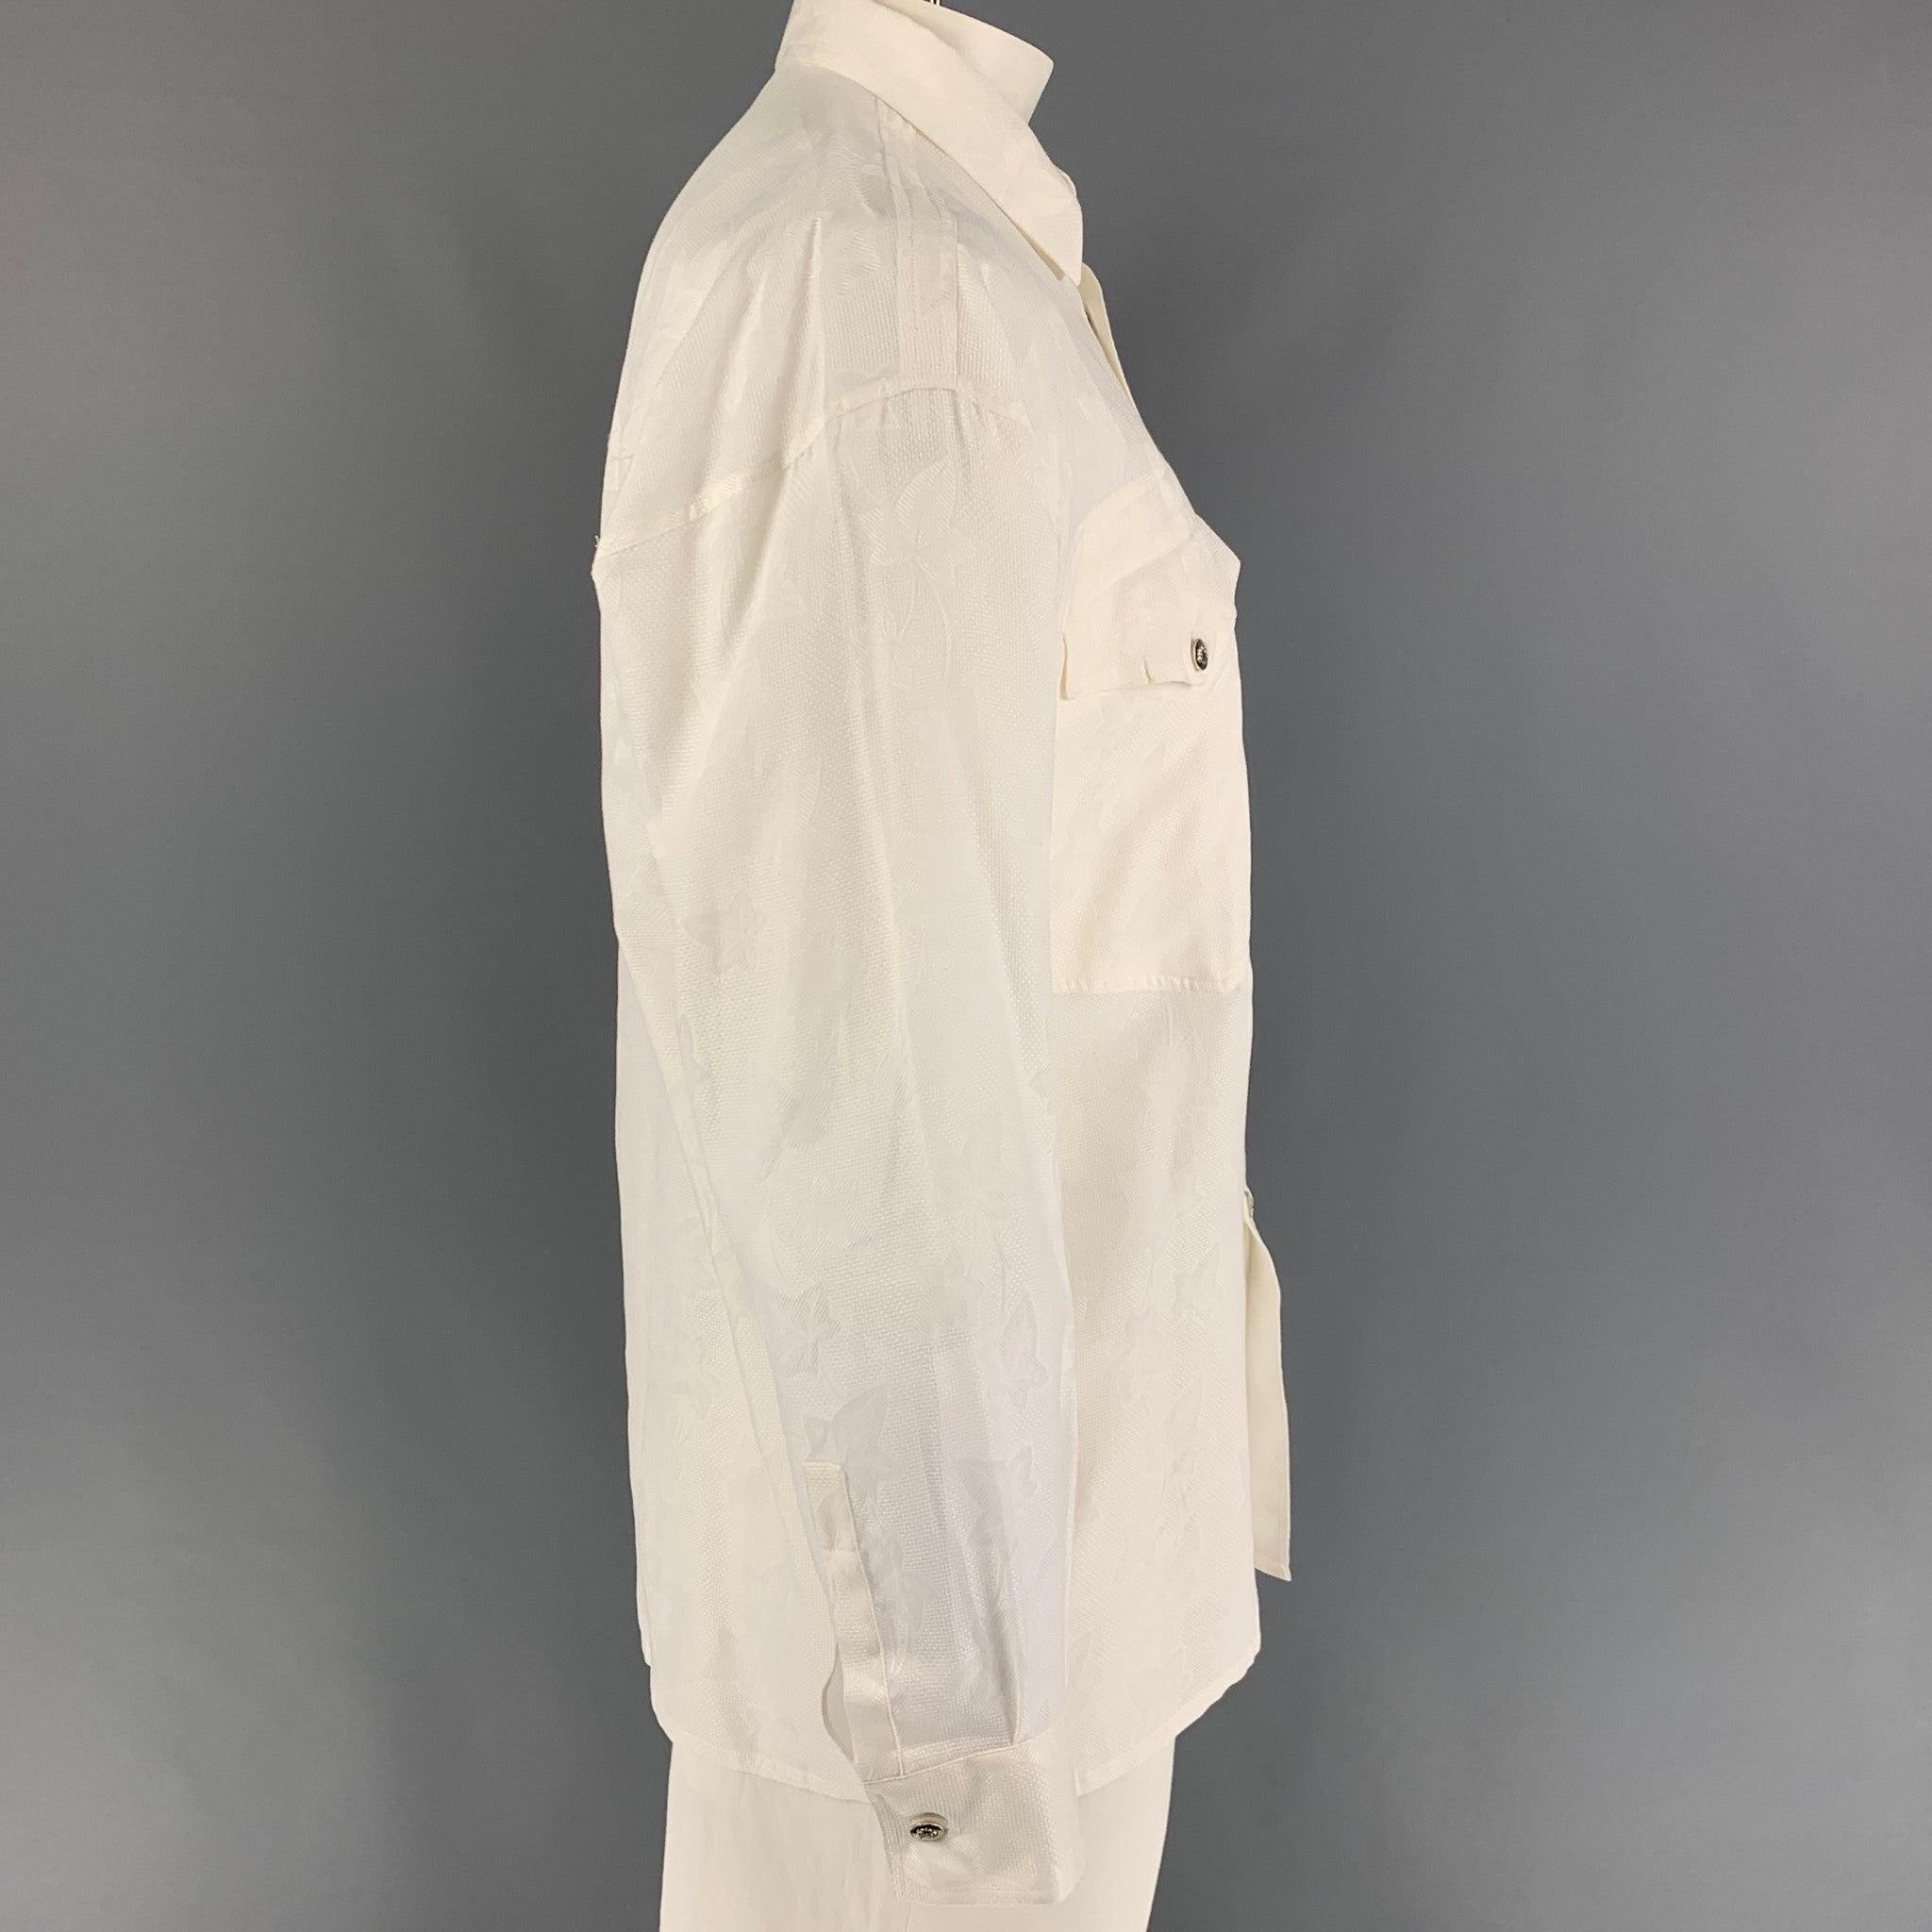 Vintage GIANNI VERSACE long sleeve shirt comes in a white floral cotton featuring a loose fit, silver tone medusa buttons, spread collar, front pockets, and a button up closure. Made in Italy.
New With Tags.
 

Marked:   46 

Measurements: 
